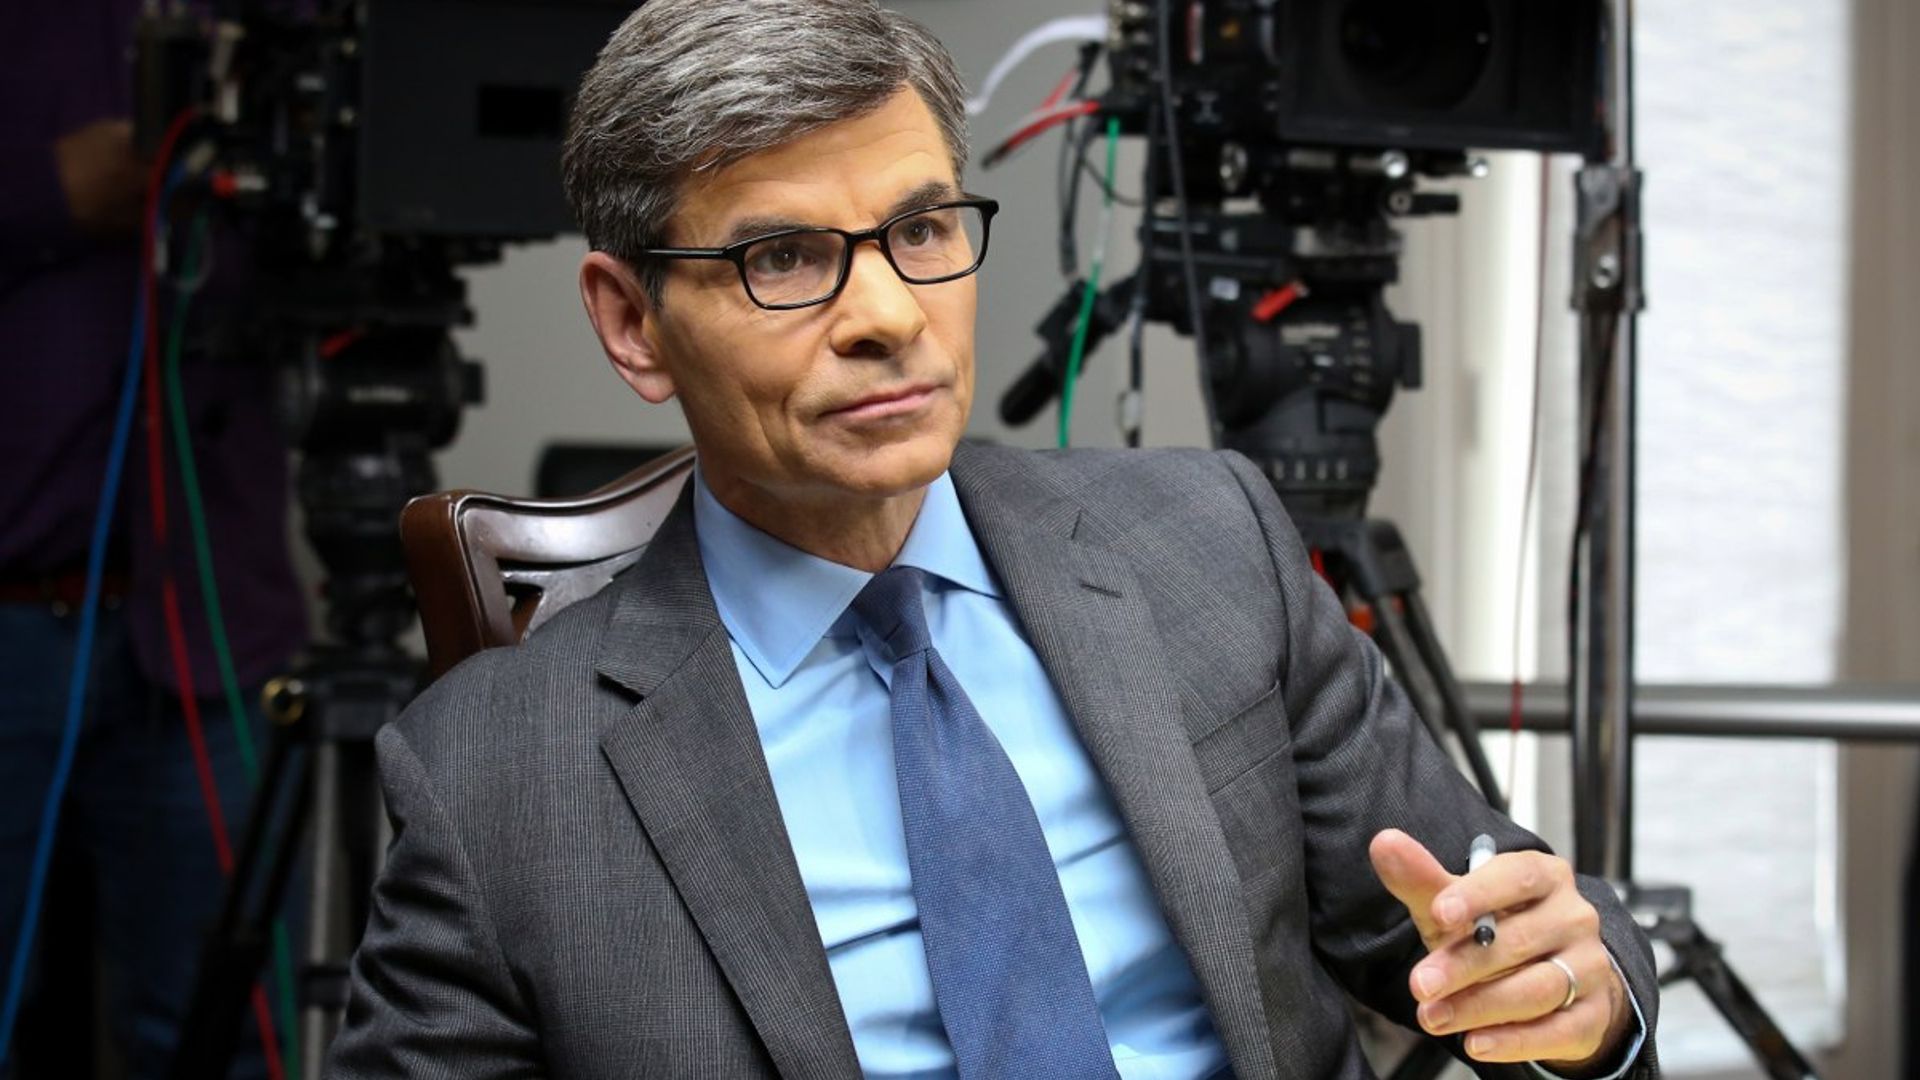 George Stephanopoulos' heartbreaking loss over the holidays as ABC mourn death